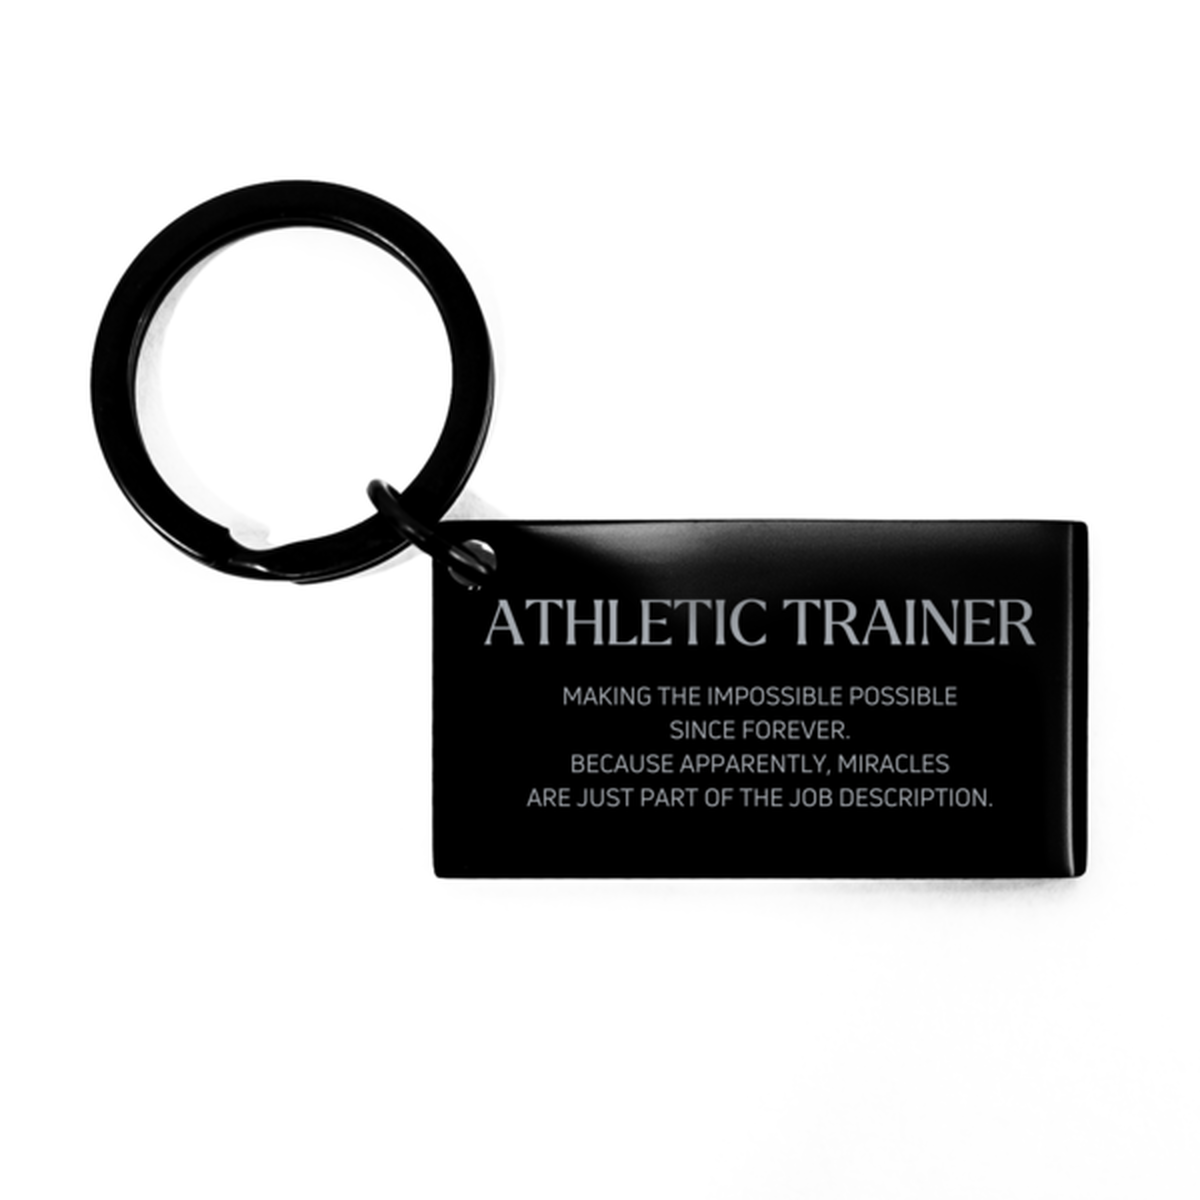 Funny Athletic Trainer Gifts, Miracles are just part of the job description, Inspirational Birthday Keychain For Athletic Trainer, Men, Women, Coworkers, Friends, Boss